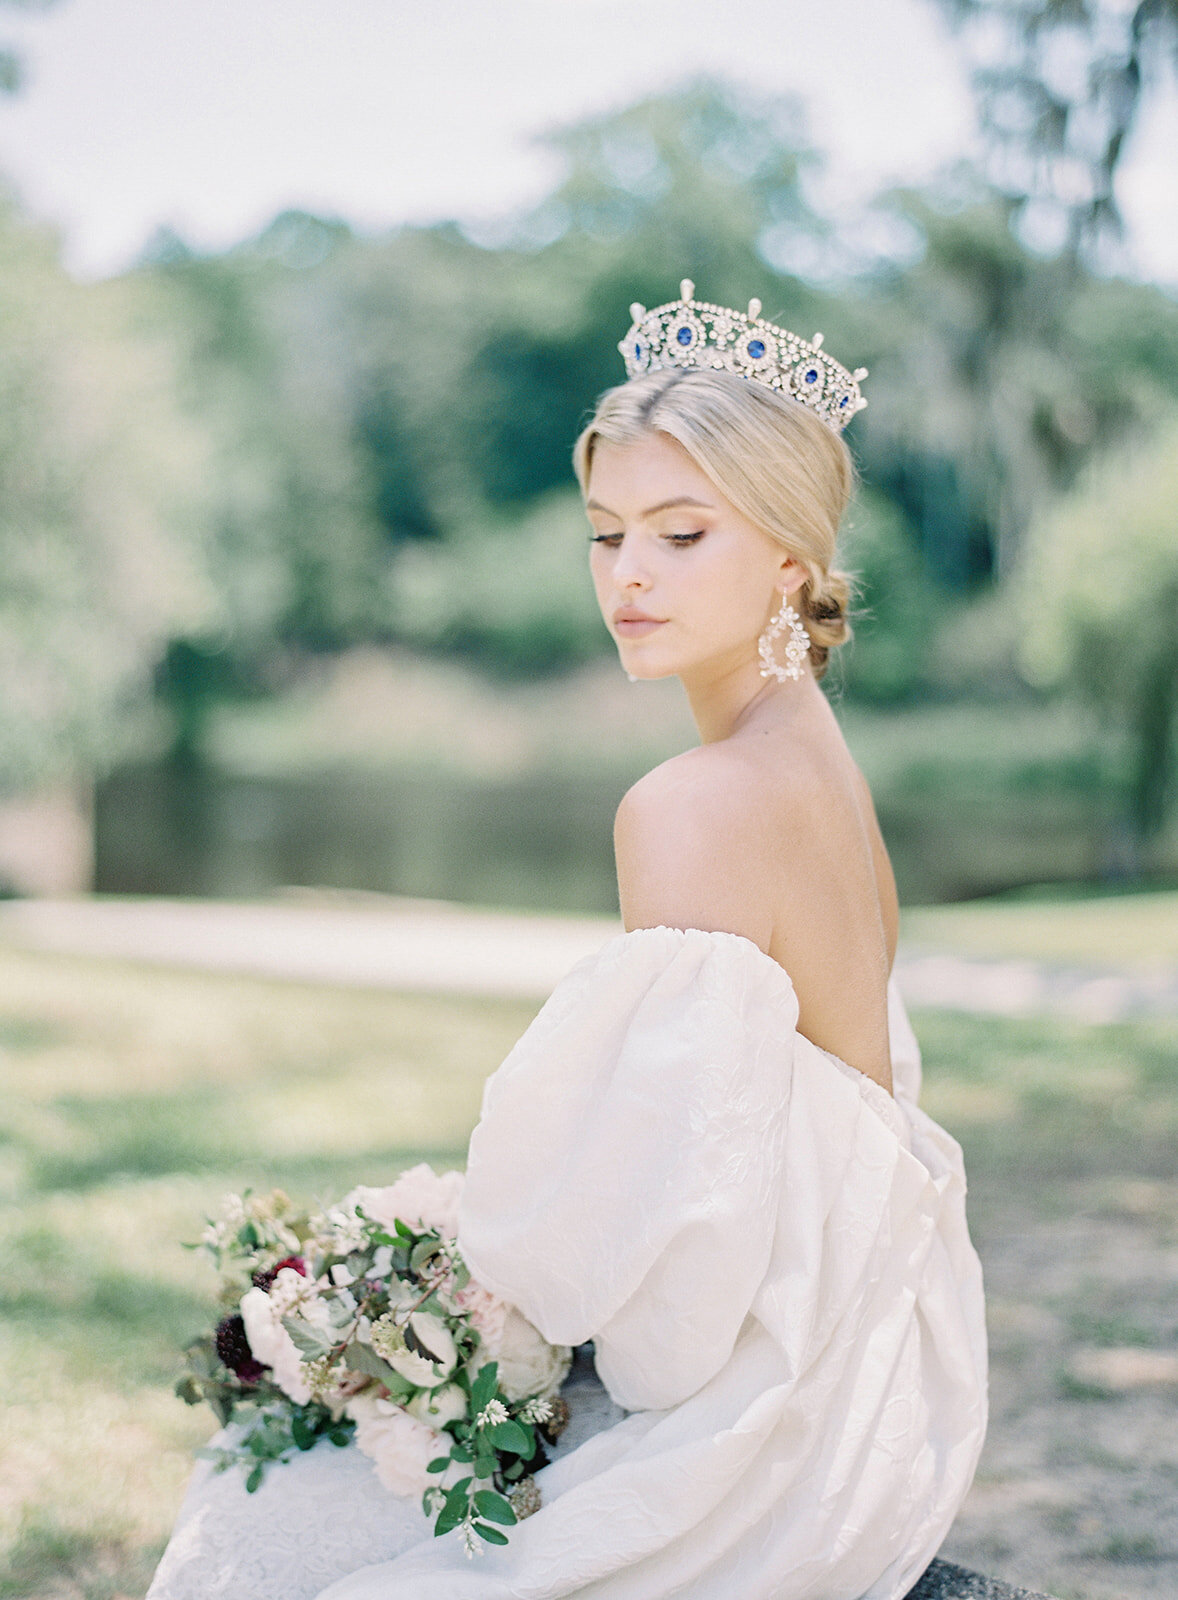 Bride wearing a sapphire crown with her hair in a low chignon bun and drop earrings. She is wearing a strapless wedding gown and cape that hangs from her upper arm so that her shoulders and back are showing. She is looking down at her bouquet on her lap. In the background are oak trees and water. Photographed by wedding photographers in Charleston Amy Mulder Photography.